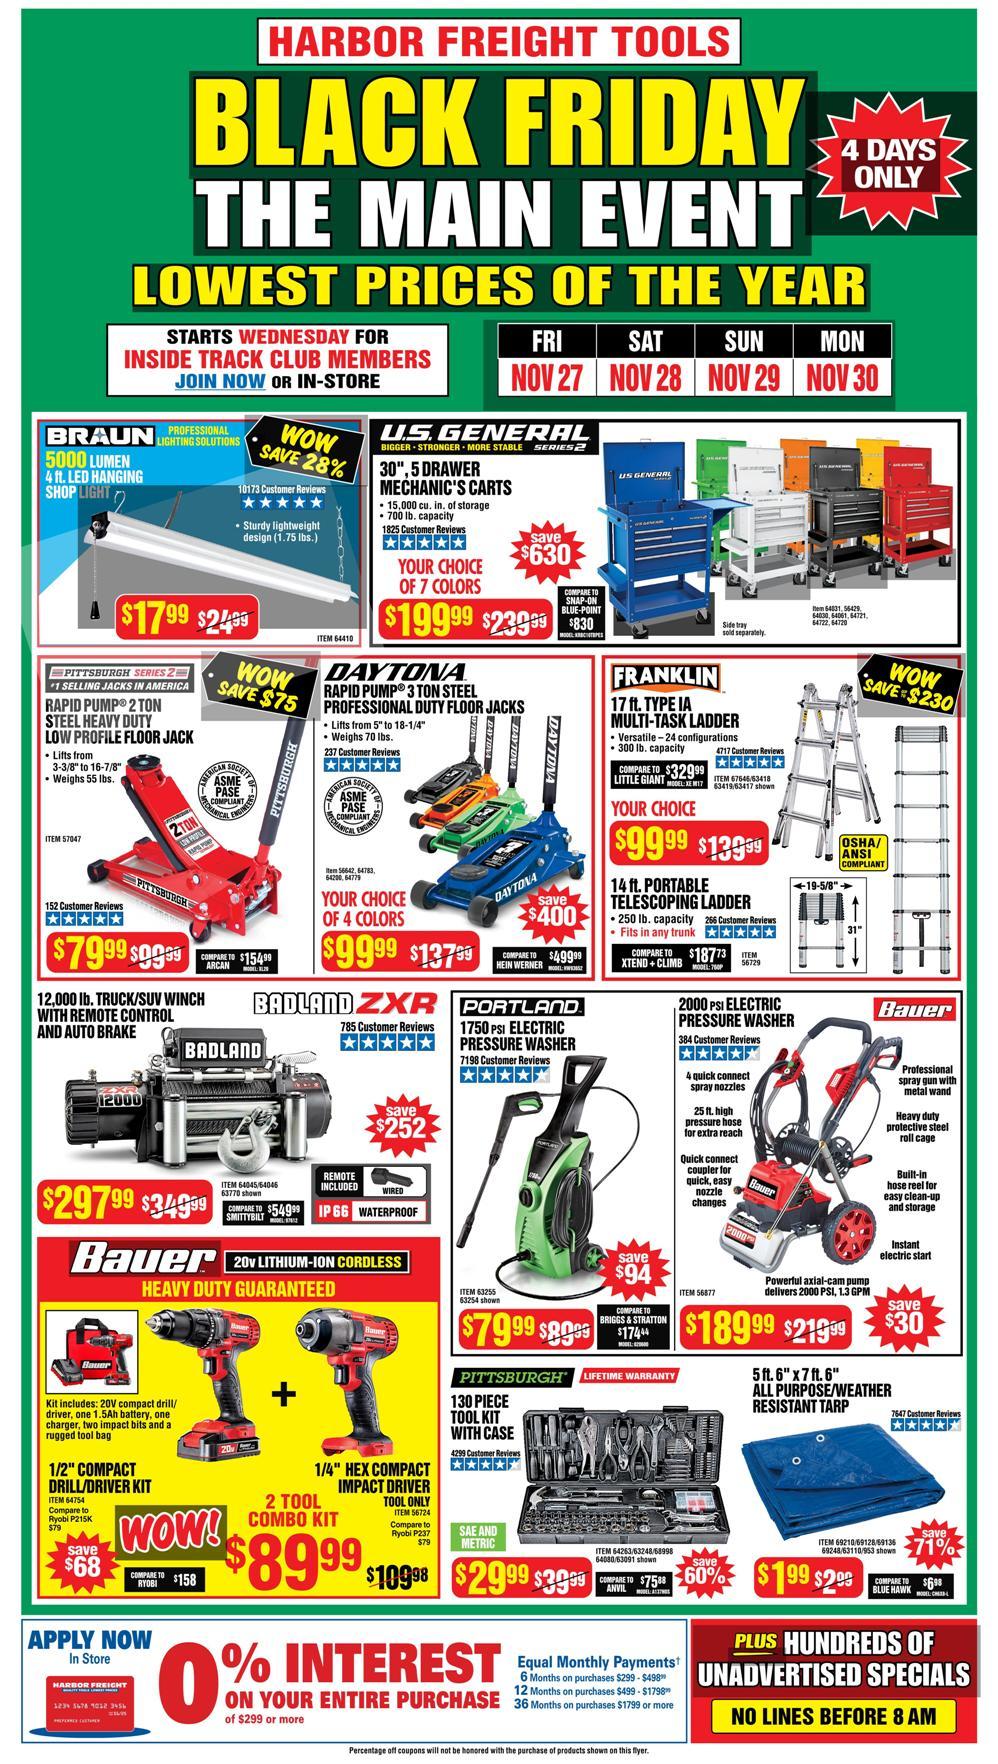 Harbor Freight Tools Black Friday Ad 2020